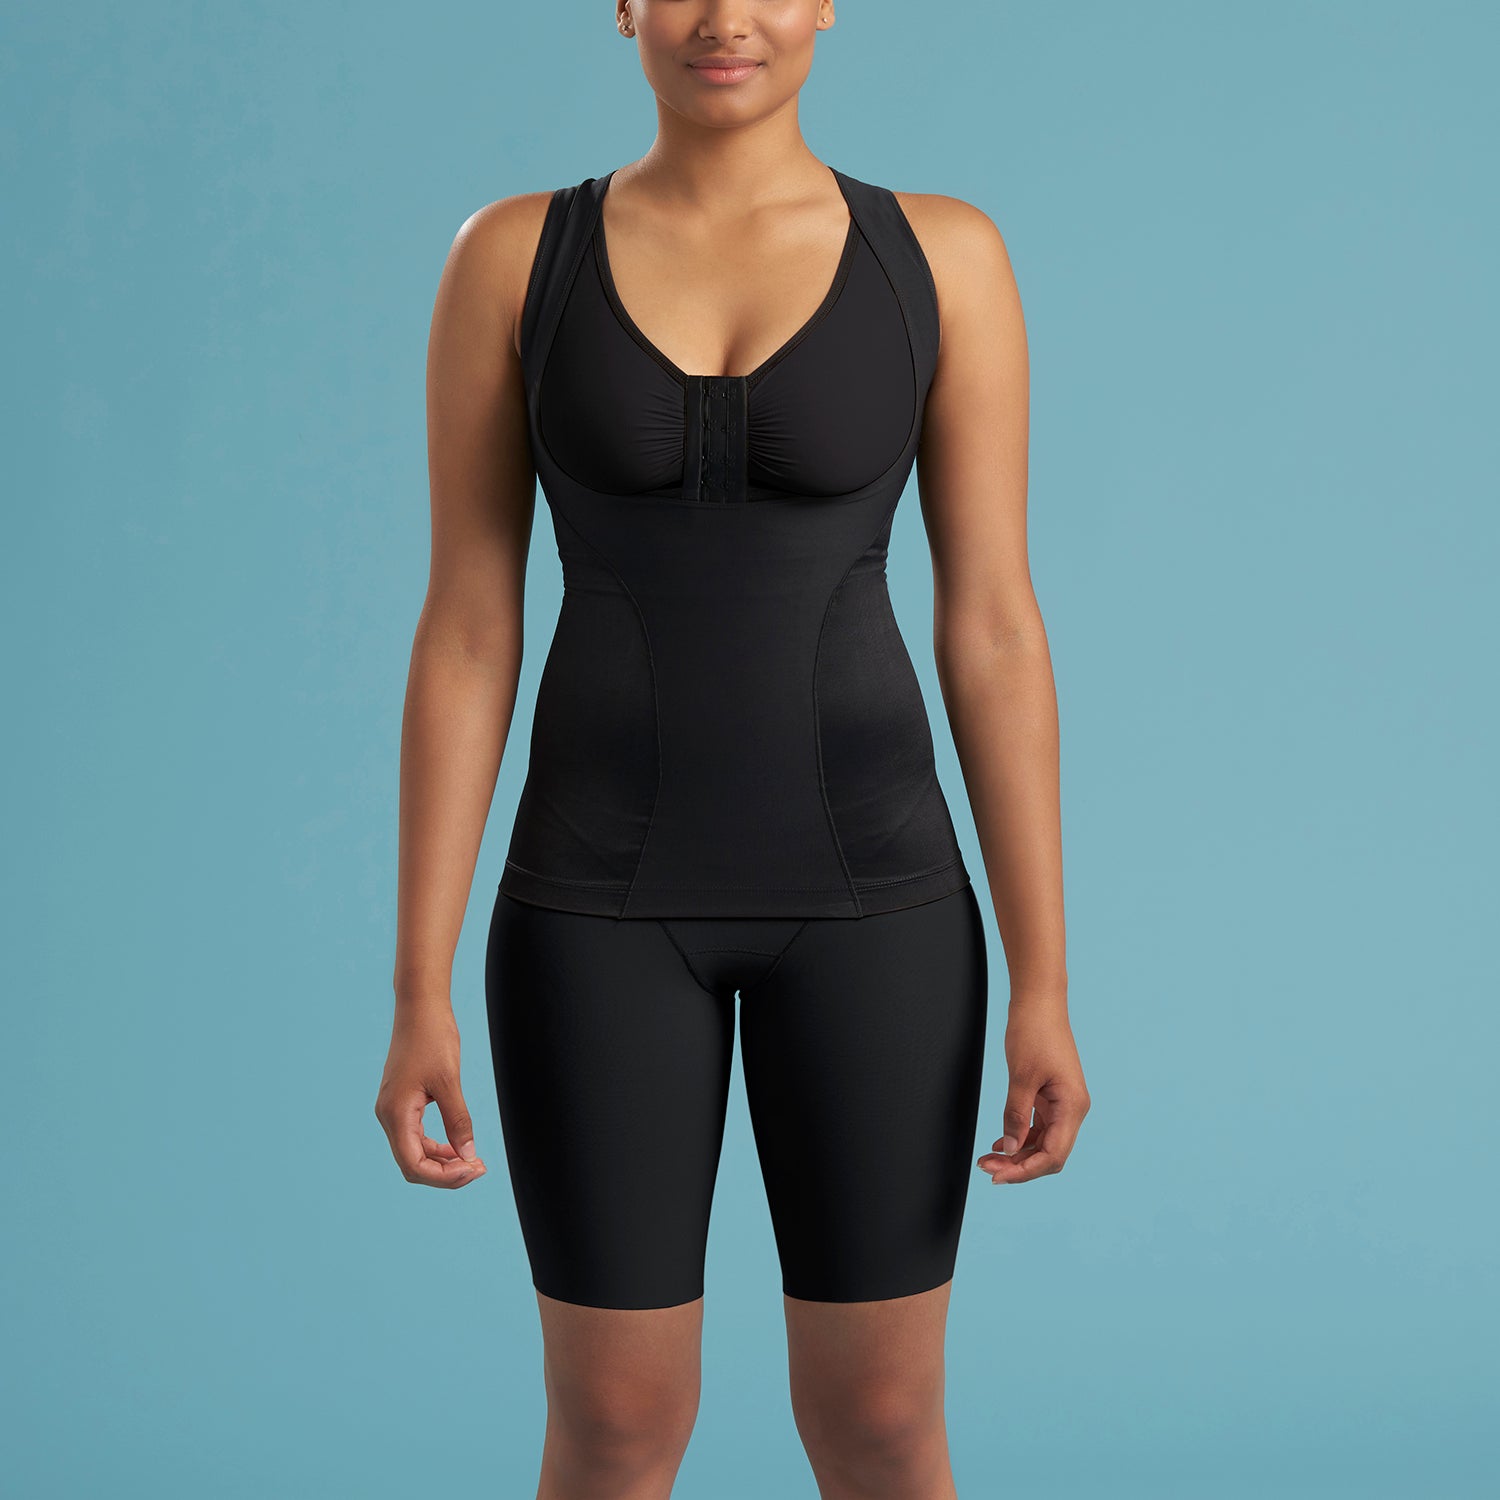 Easy-On Pocket Key-Hole Compression Cami - The Marena Group